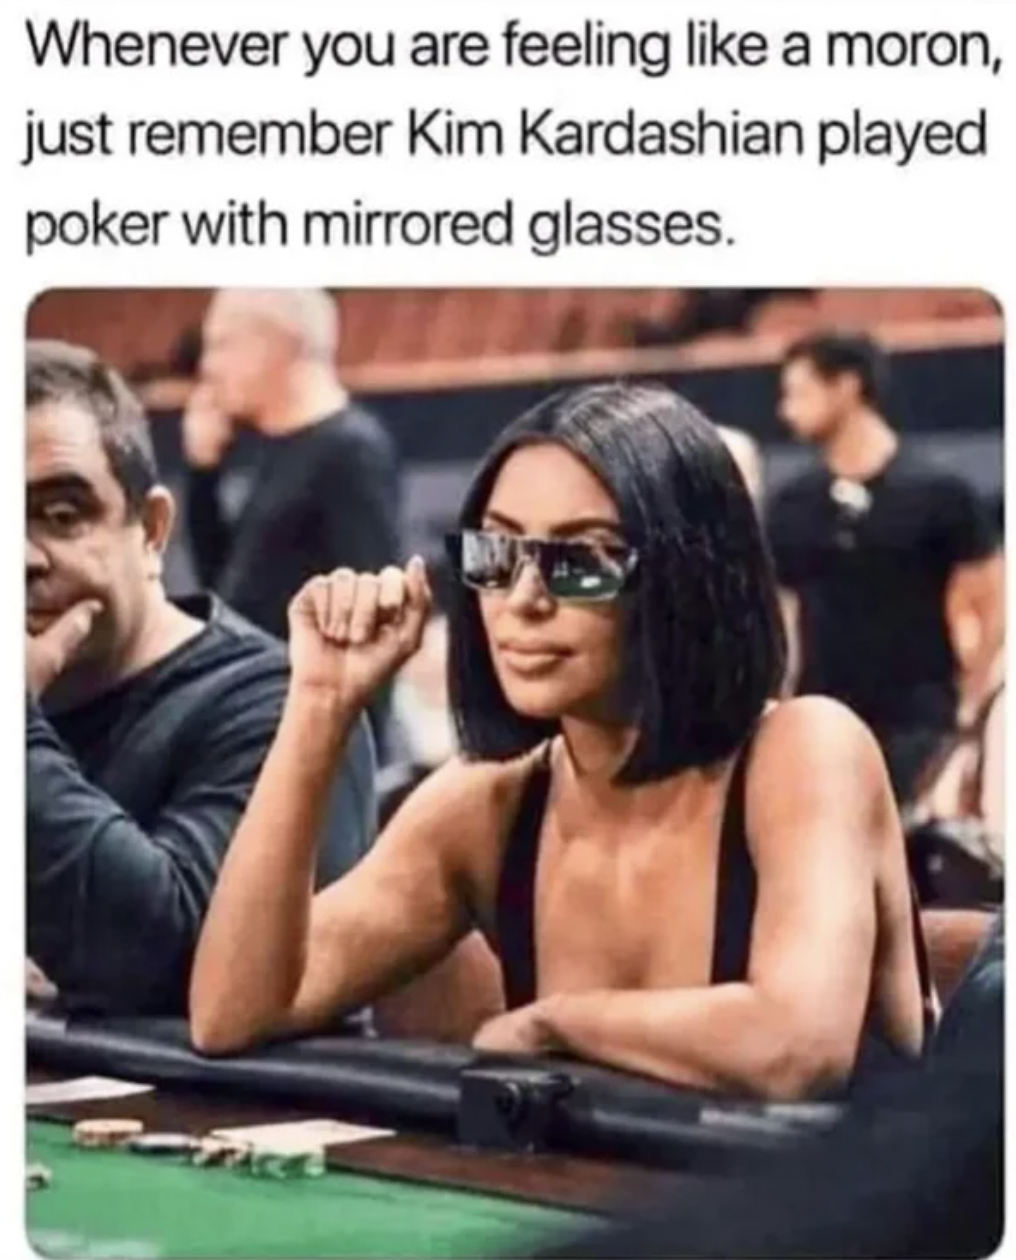 Whenever you are feeling a moron, just remember Kim Kardashian played poker with mirrored glasses.